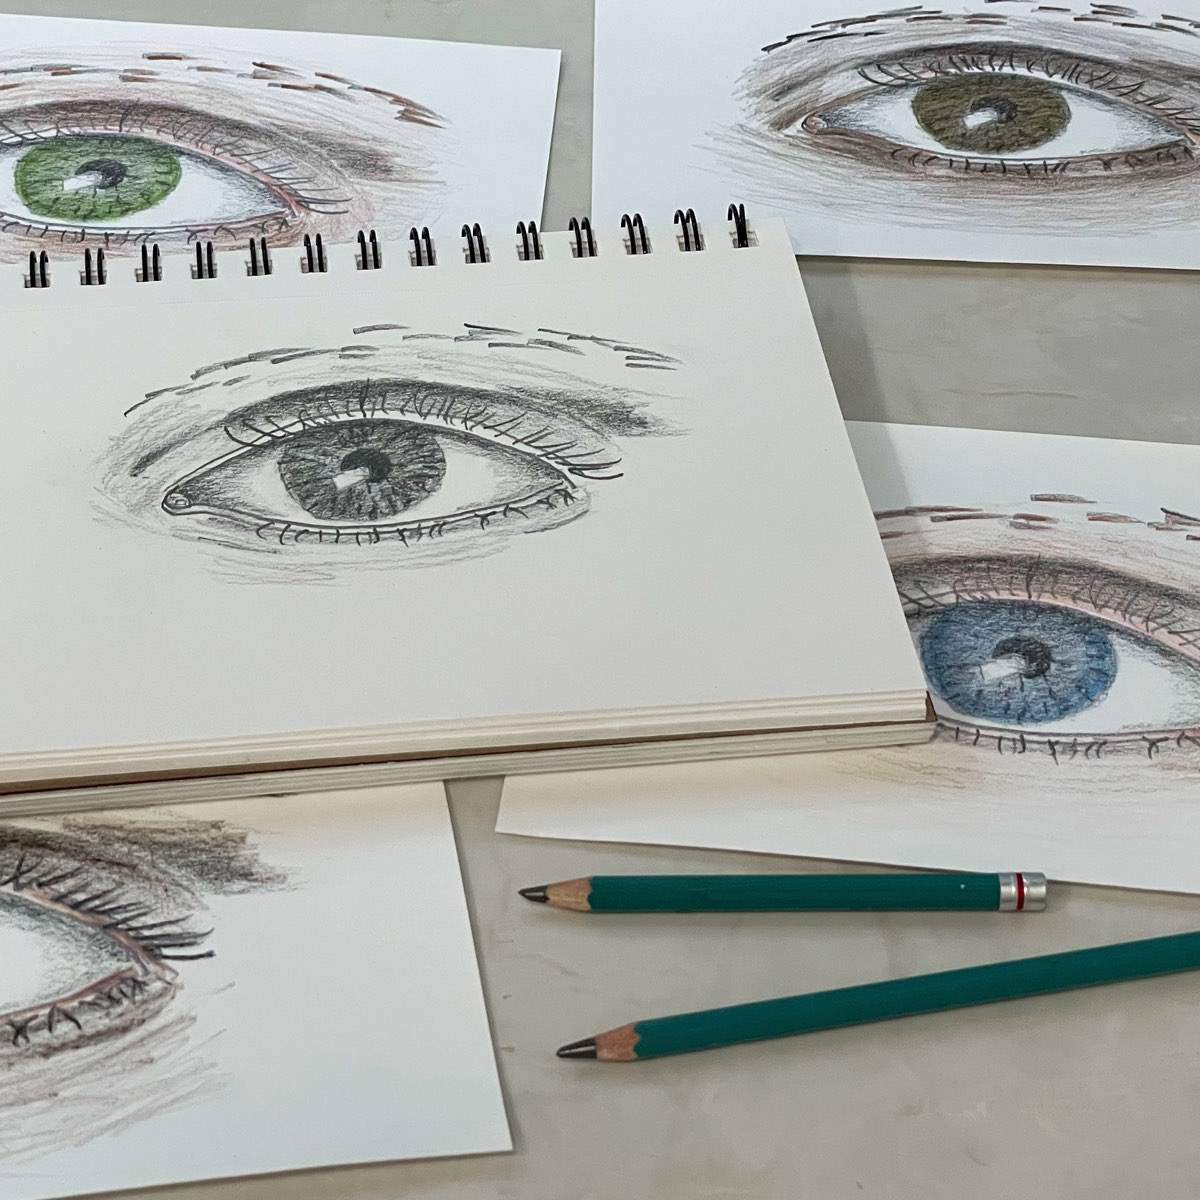 A pencil drawing of an eye on a sketchbook with drawing pencils next to colored pencil drawing of eyes.